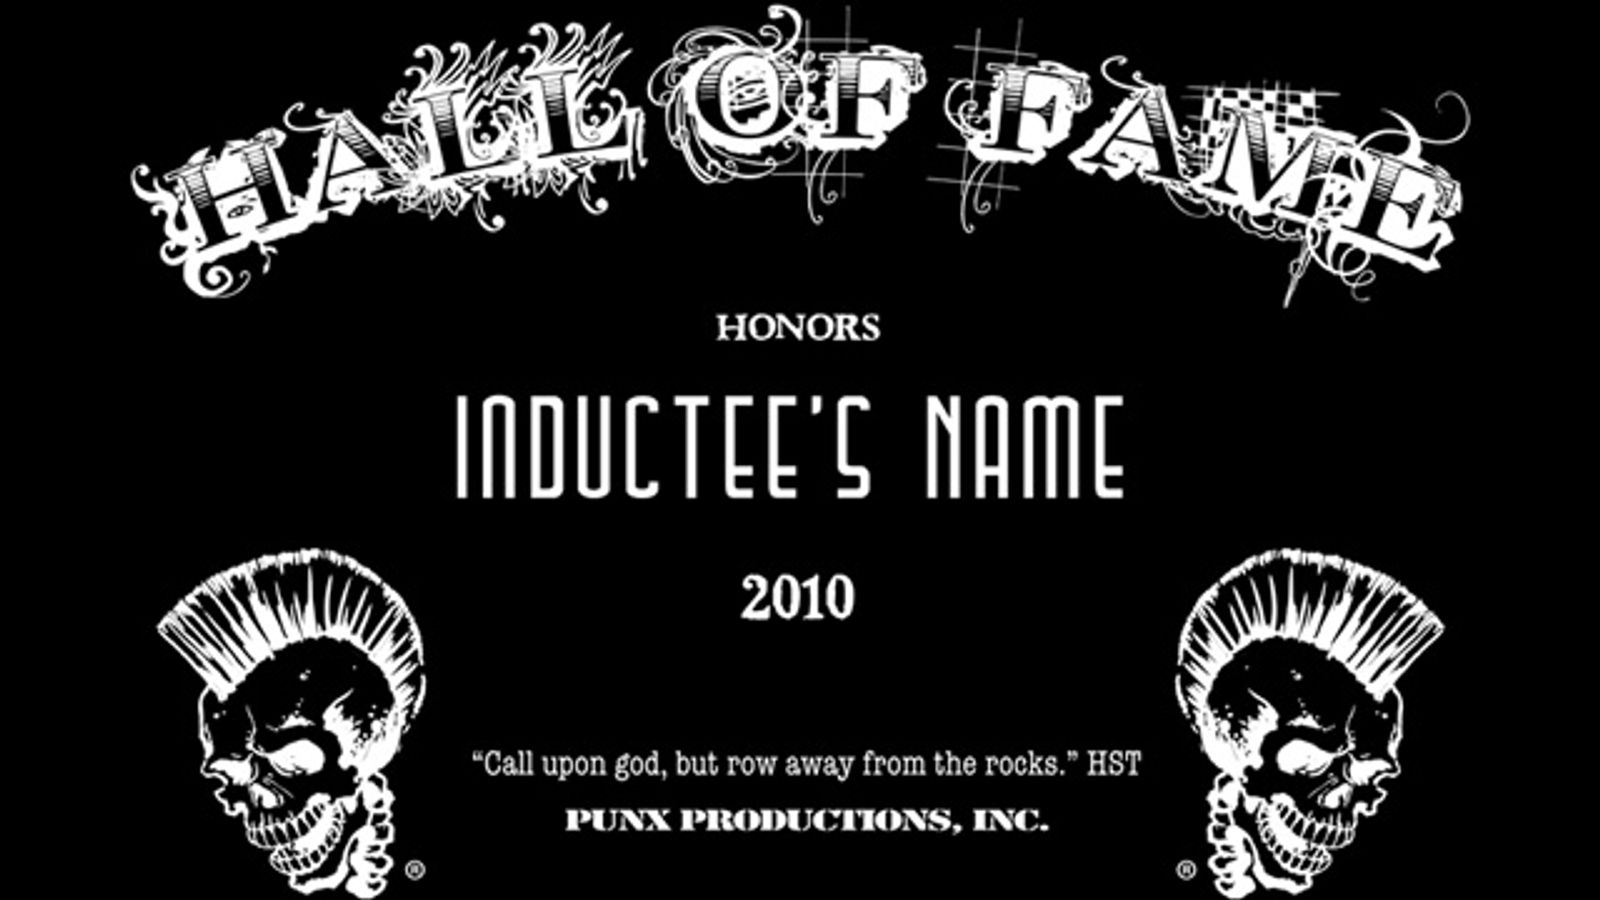 Rob Rotten Creates Punx Productions Hall of Fame